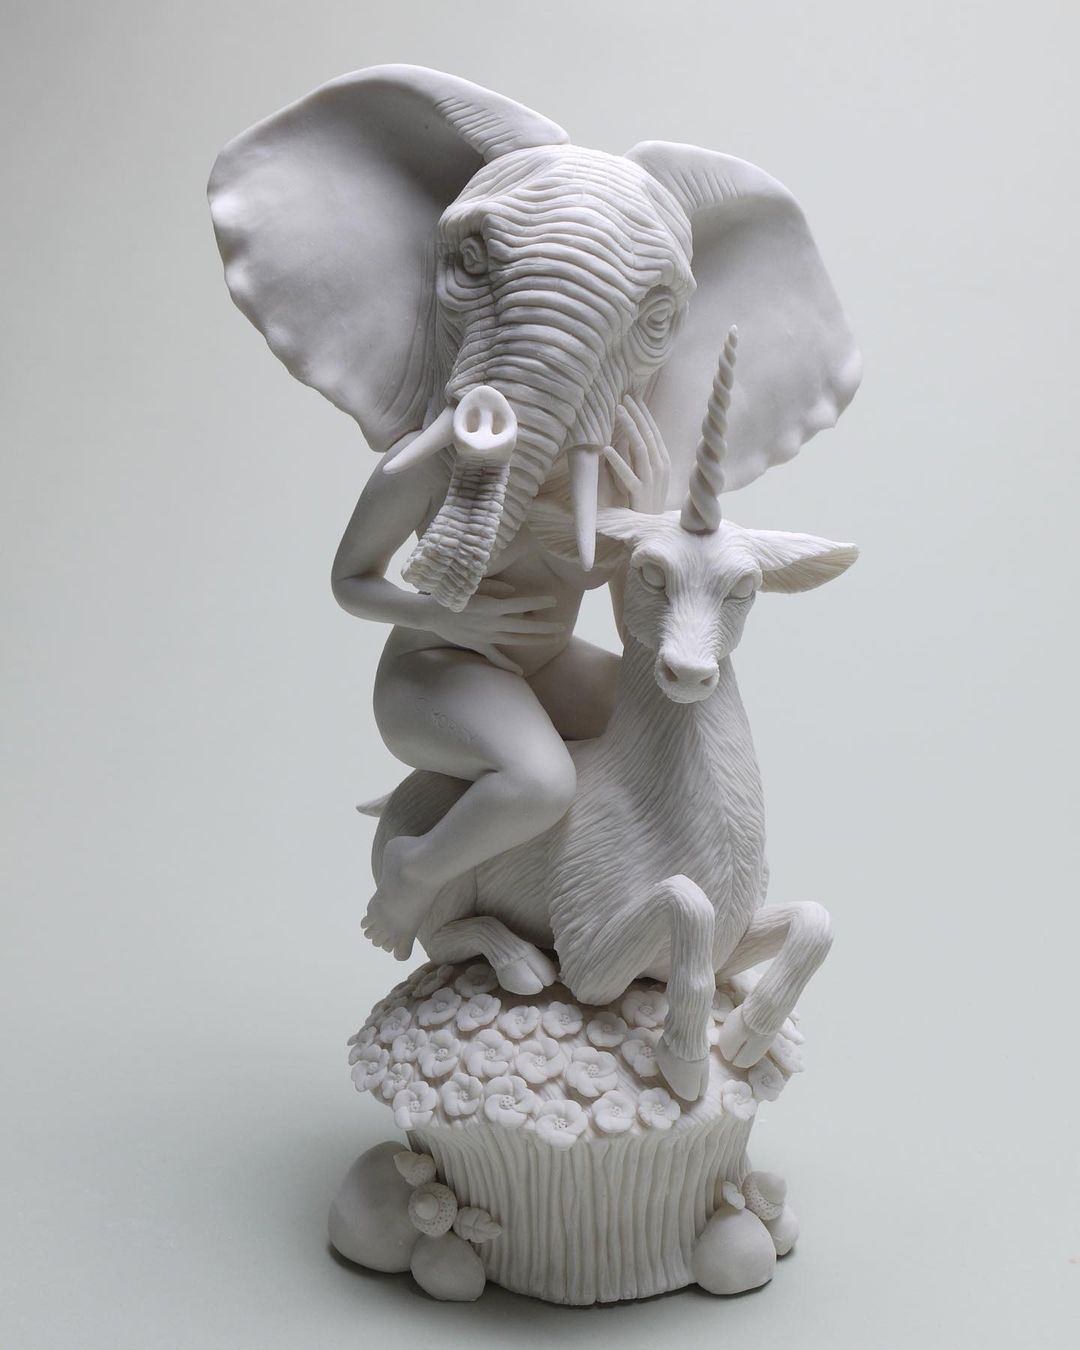 Fabulous Sculptures Of Human Animal Hybrids By Crystal Morey 1